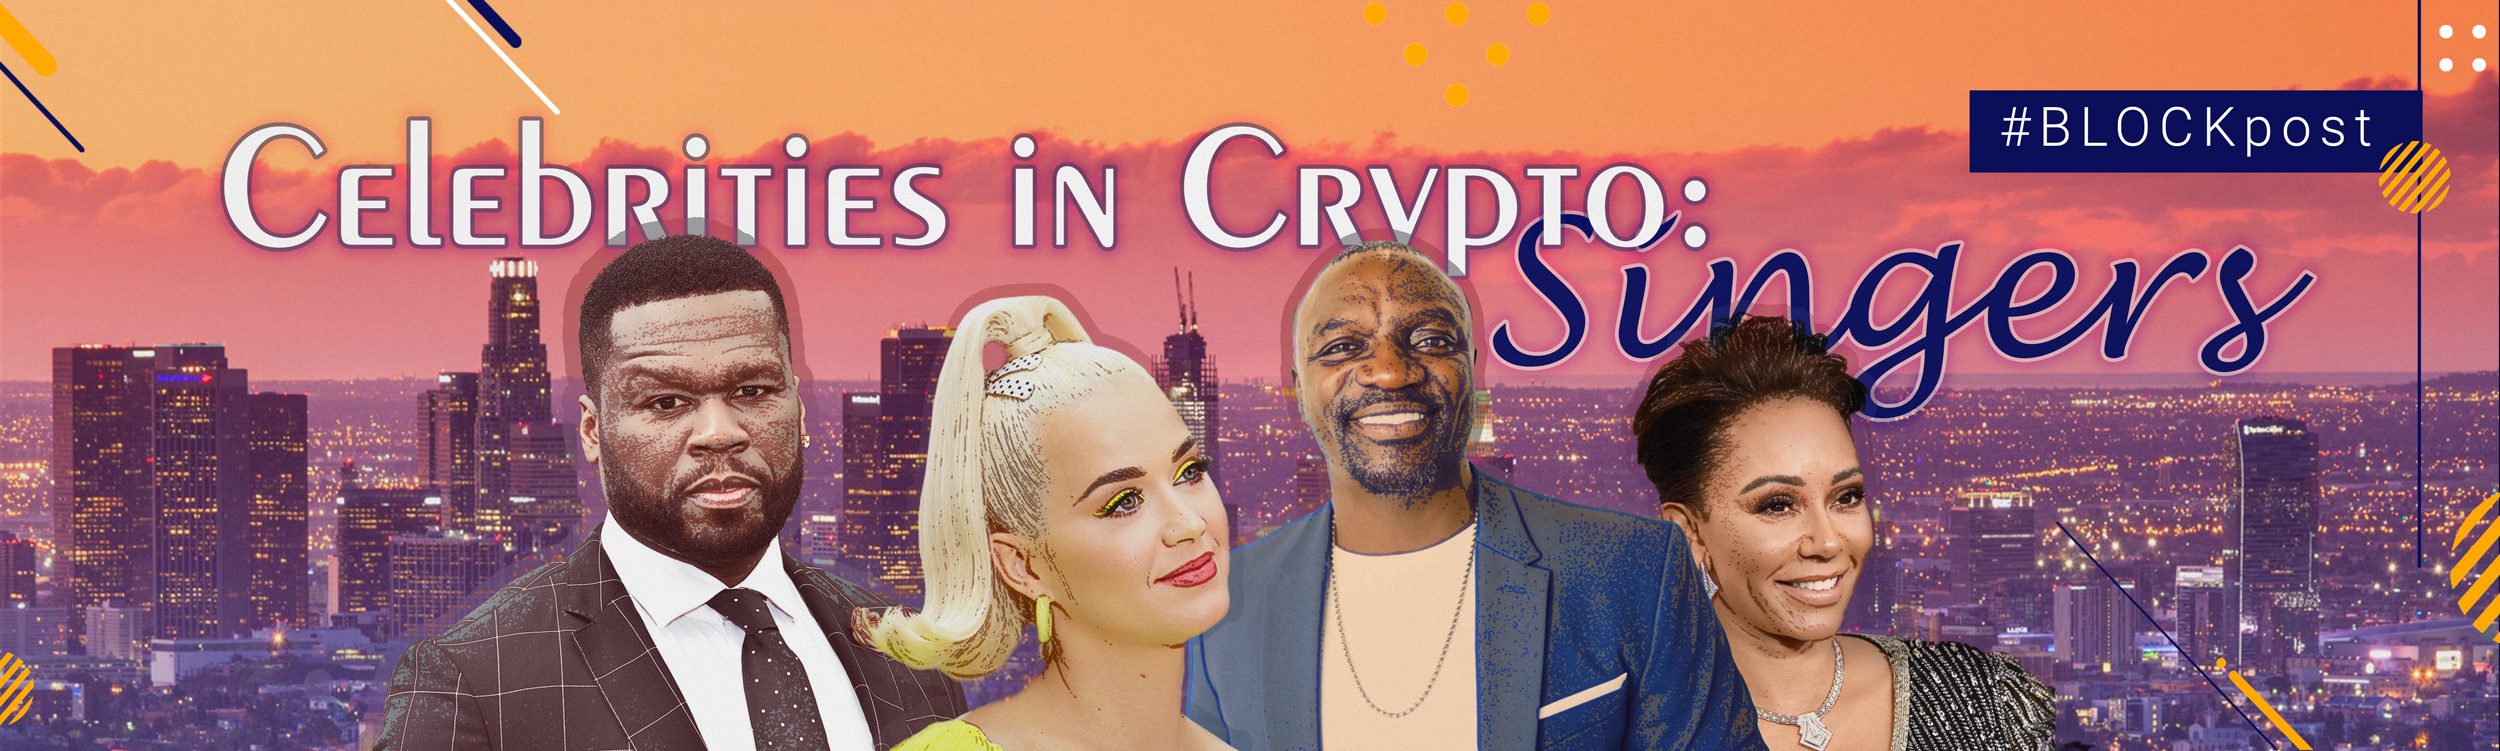 Crypto ncelebrity dna based cryptocurrency